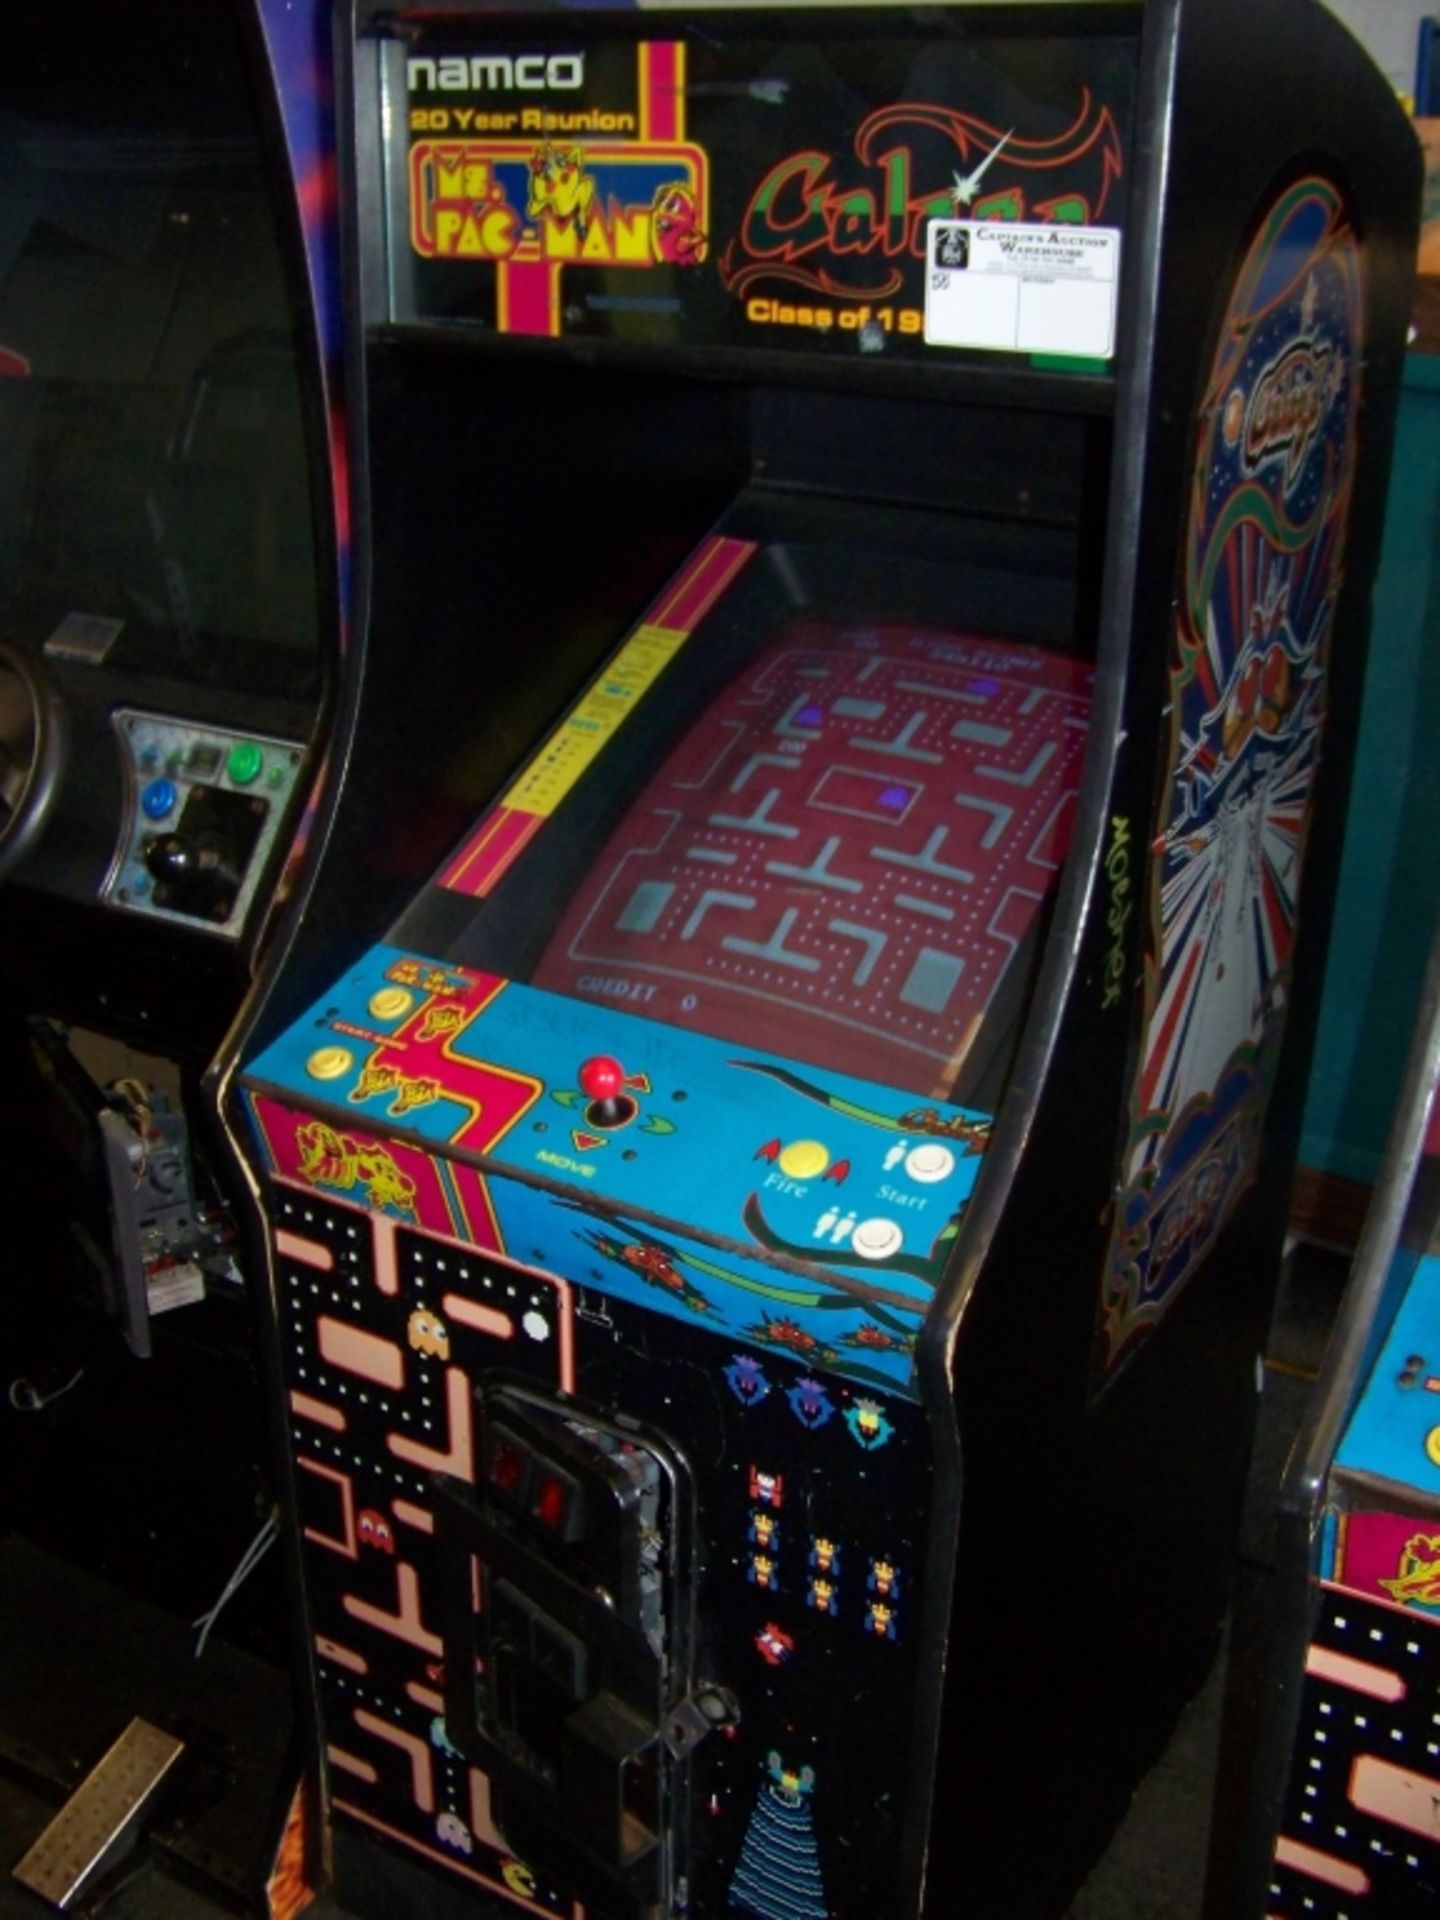 CLASS OF 1981 GALAGA MS. PACMAN ARCADE GAME NAMCO Item is in used condition. Evidence of wear and - Image 2 of 2